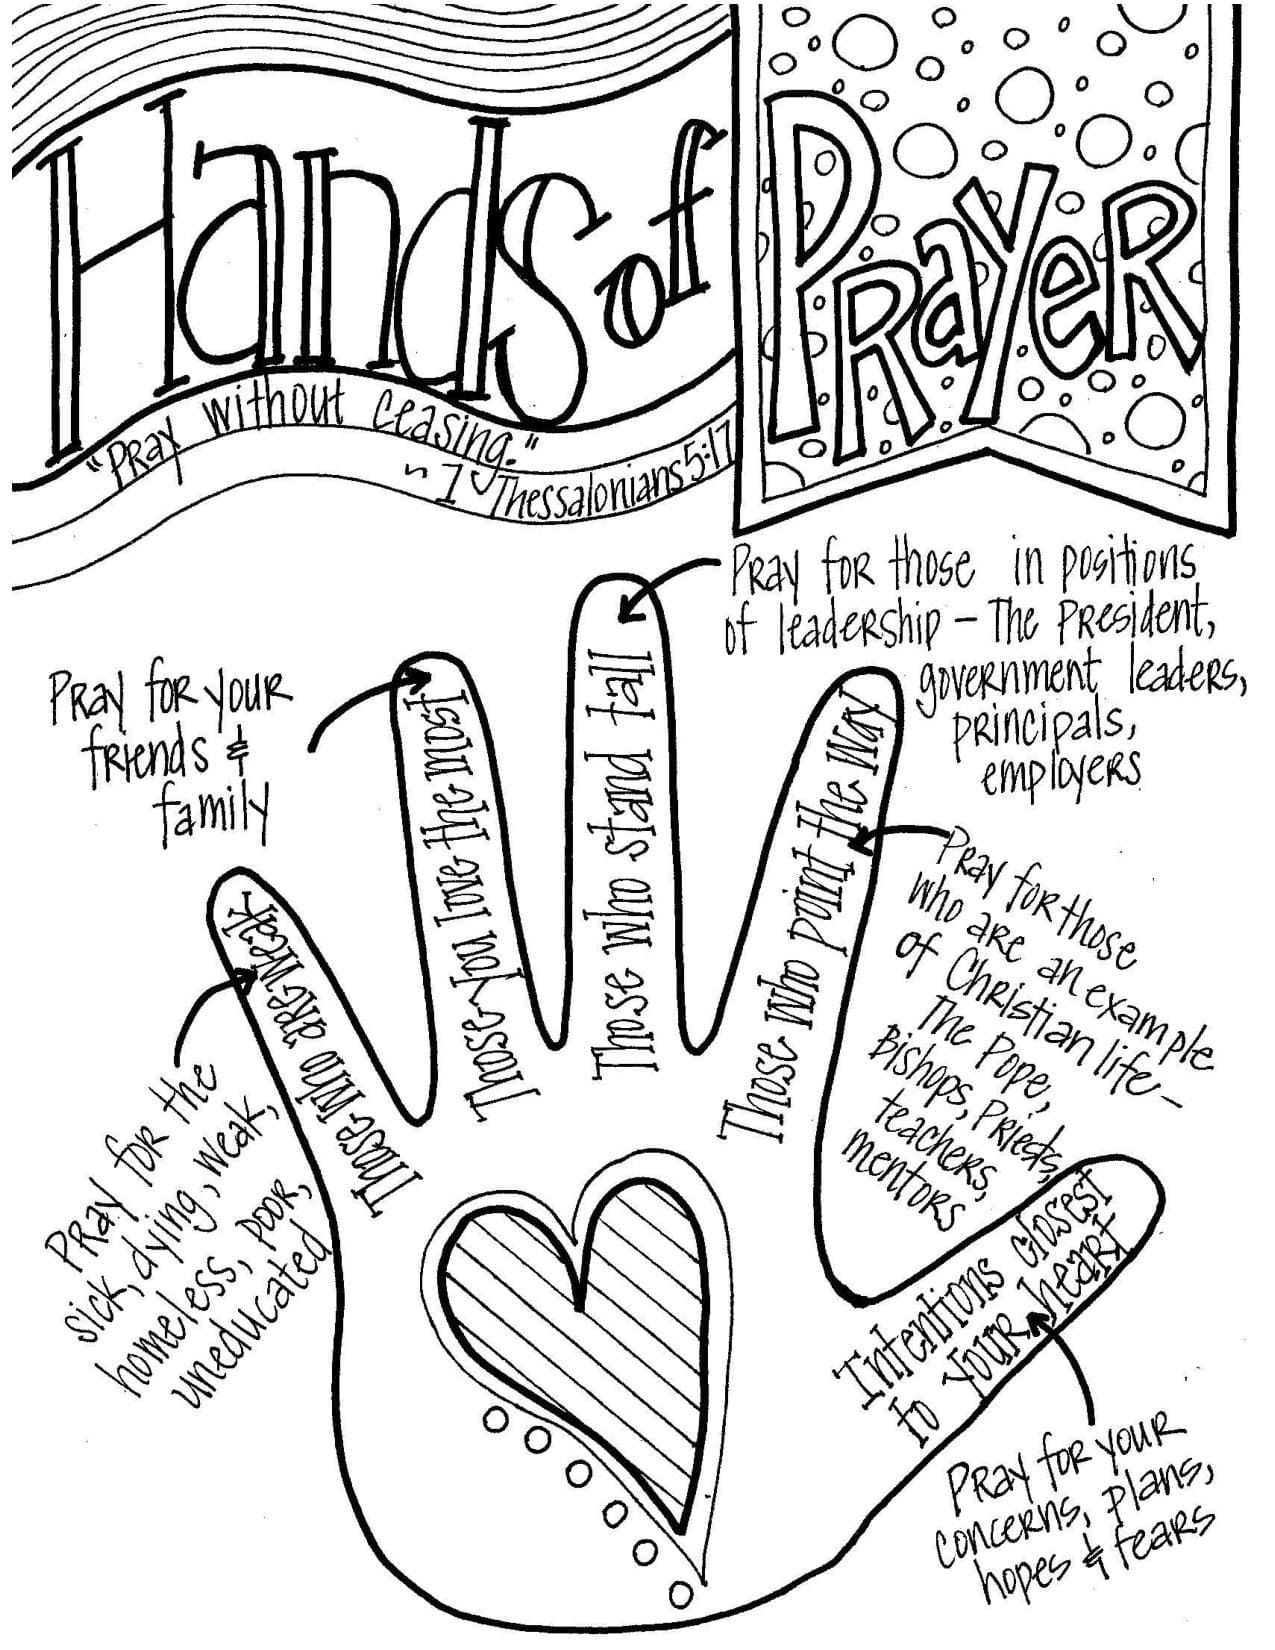 Hands Of Prayer Coloring Page Free Printable Coloring Pages For Kids